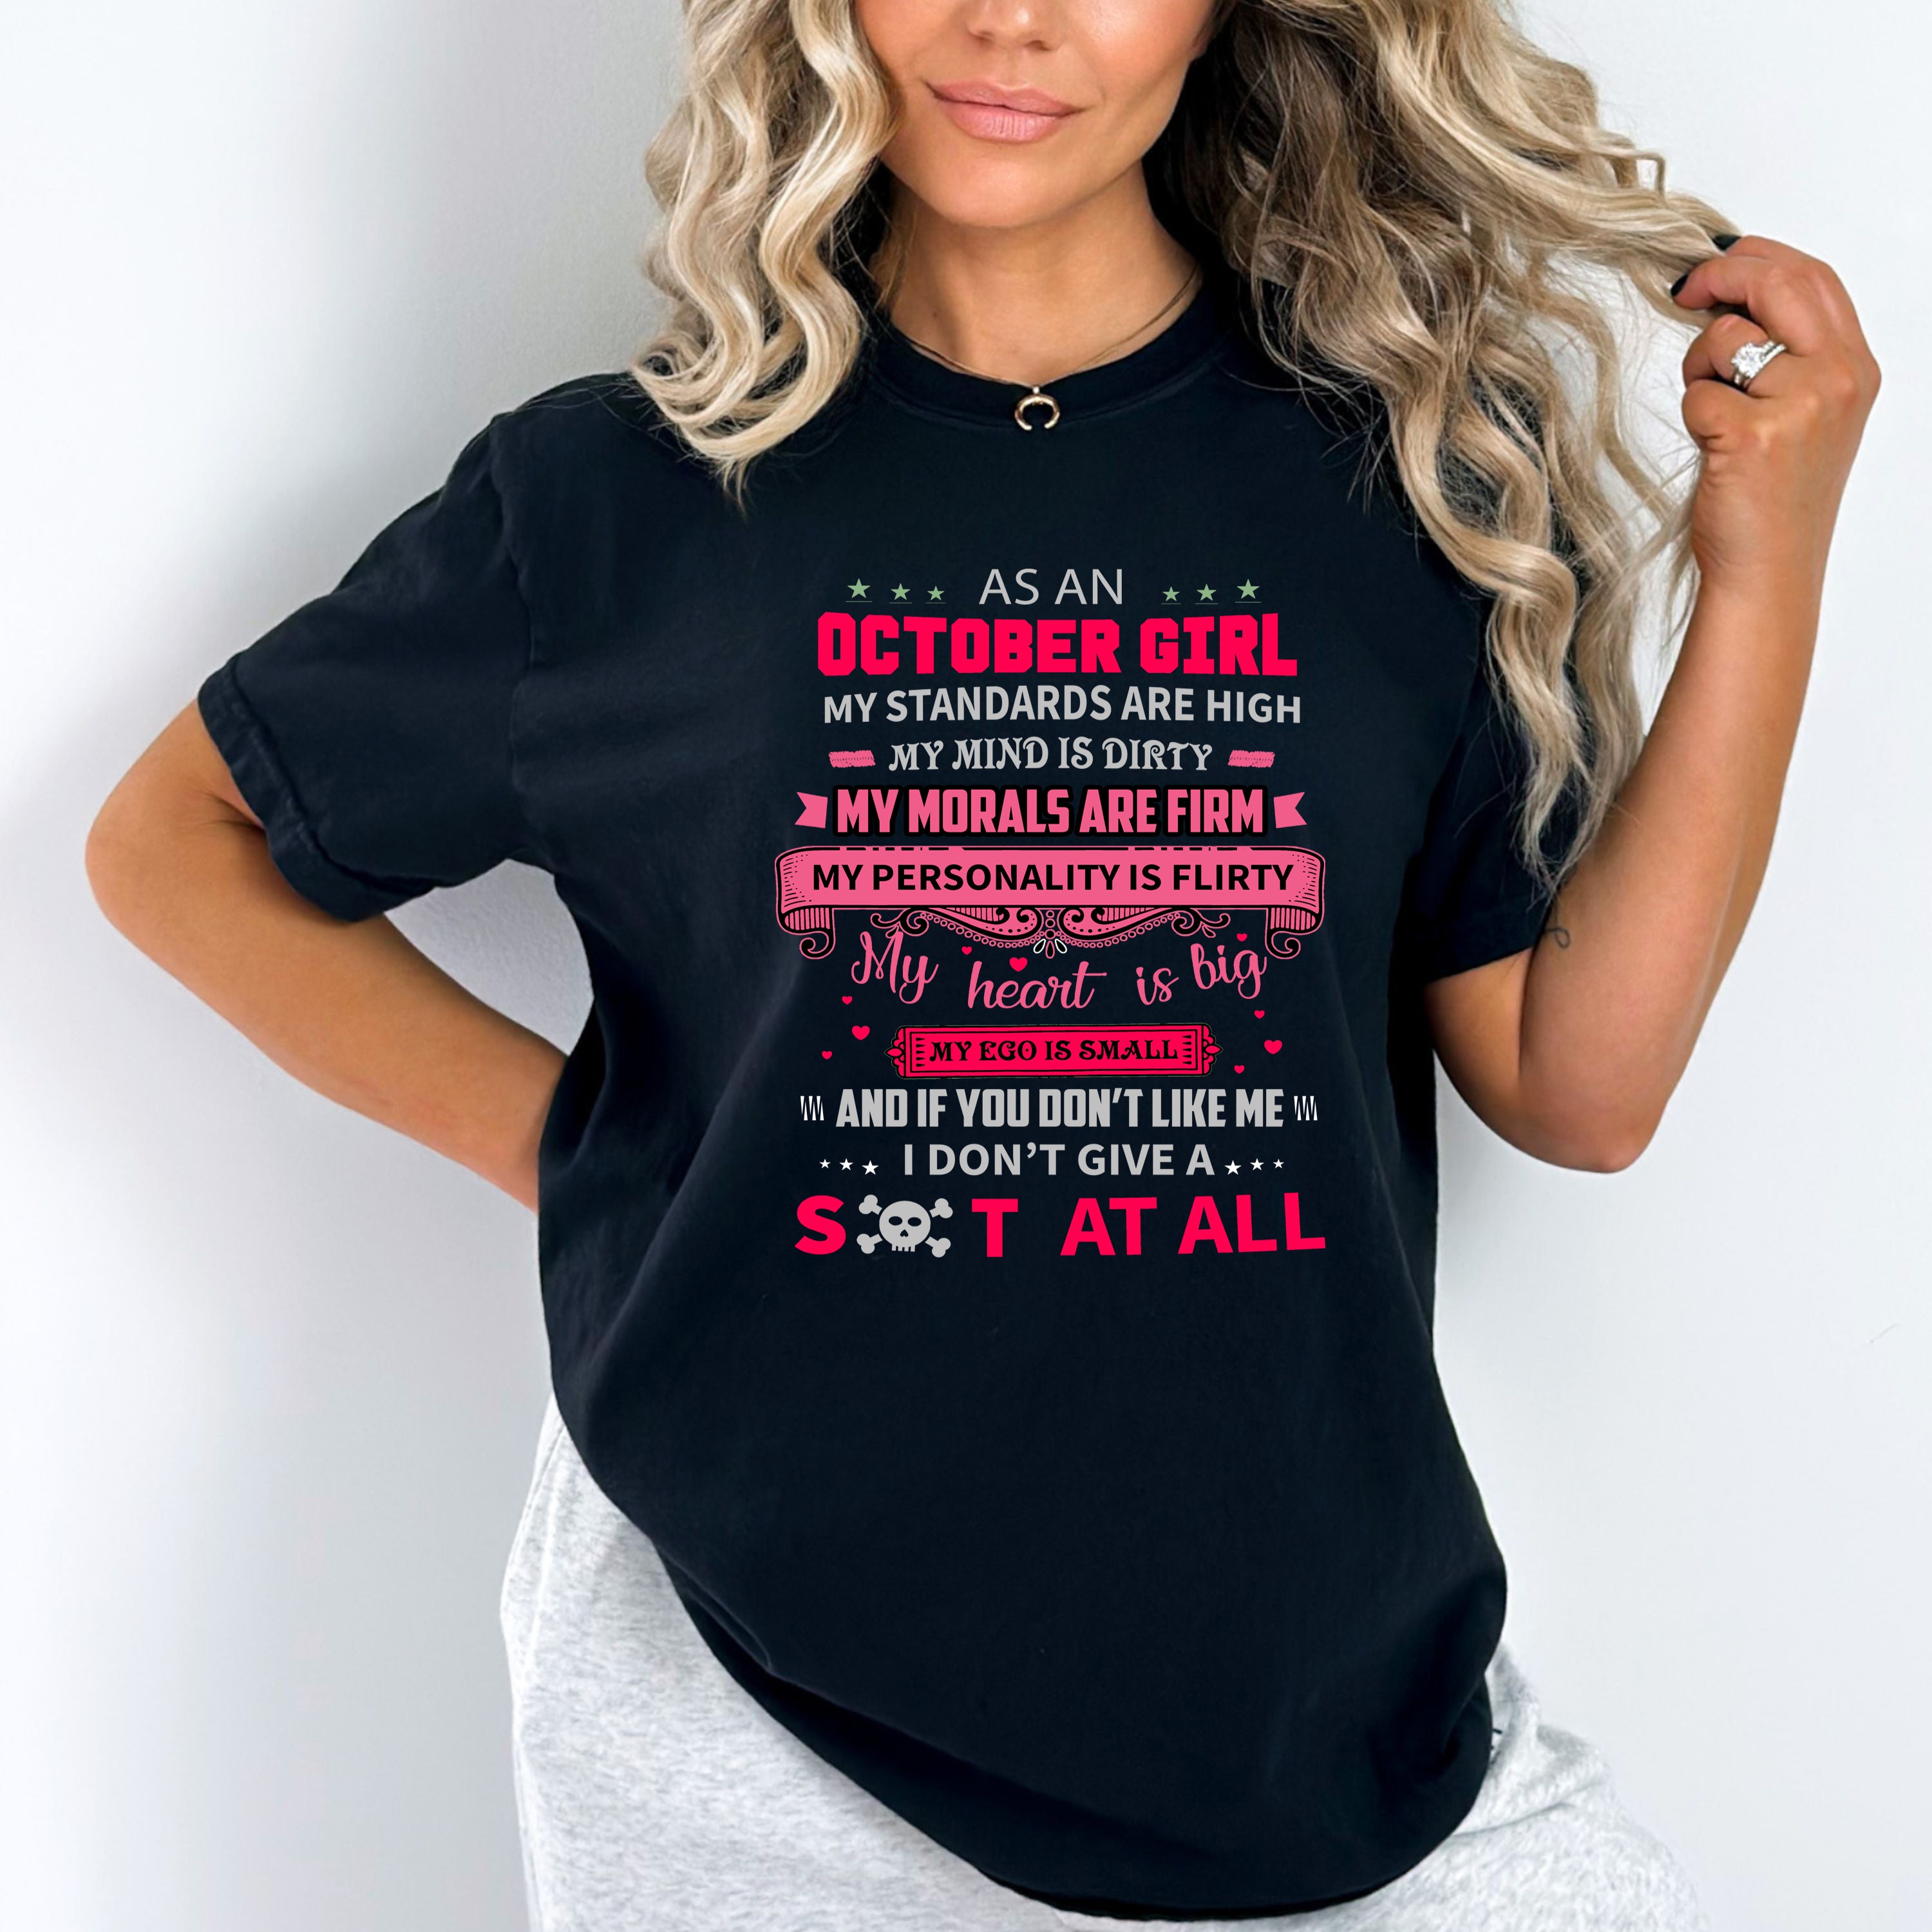 "As An October Girl My Standards Are High".